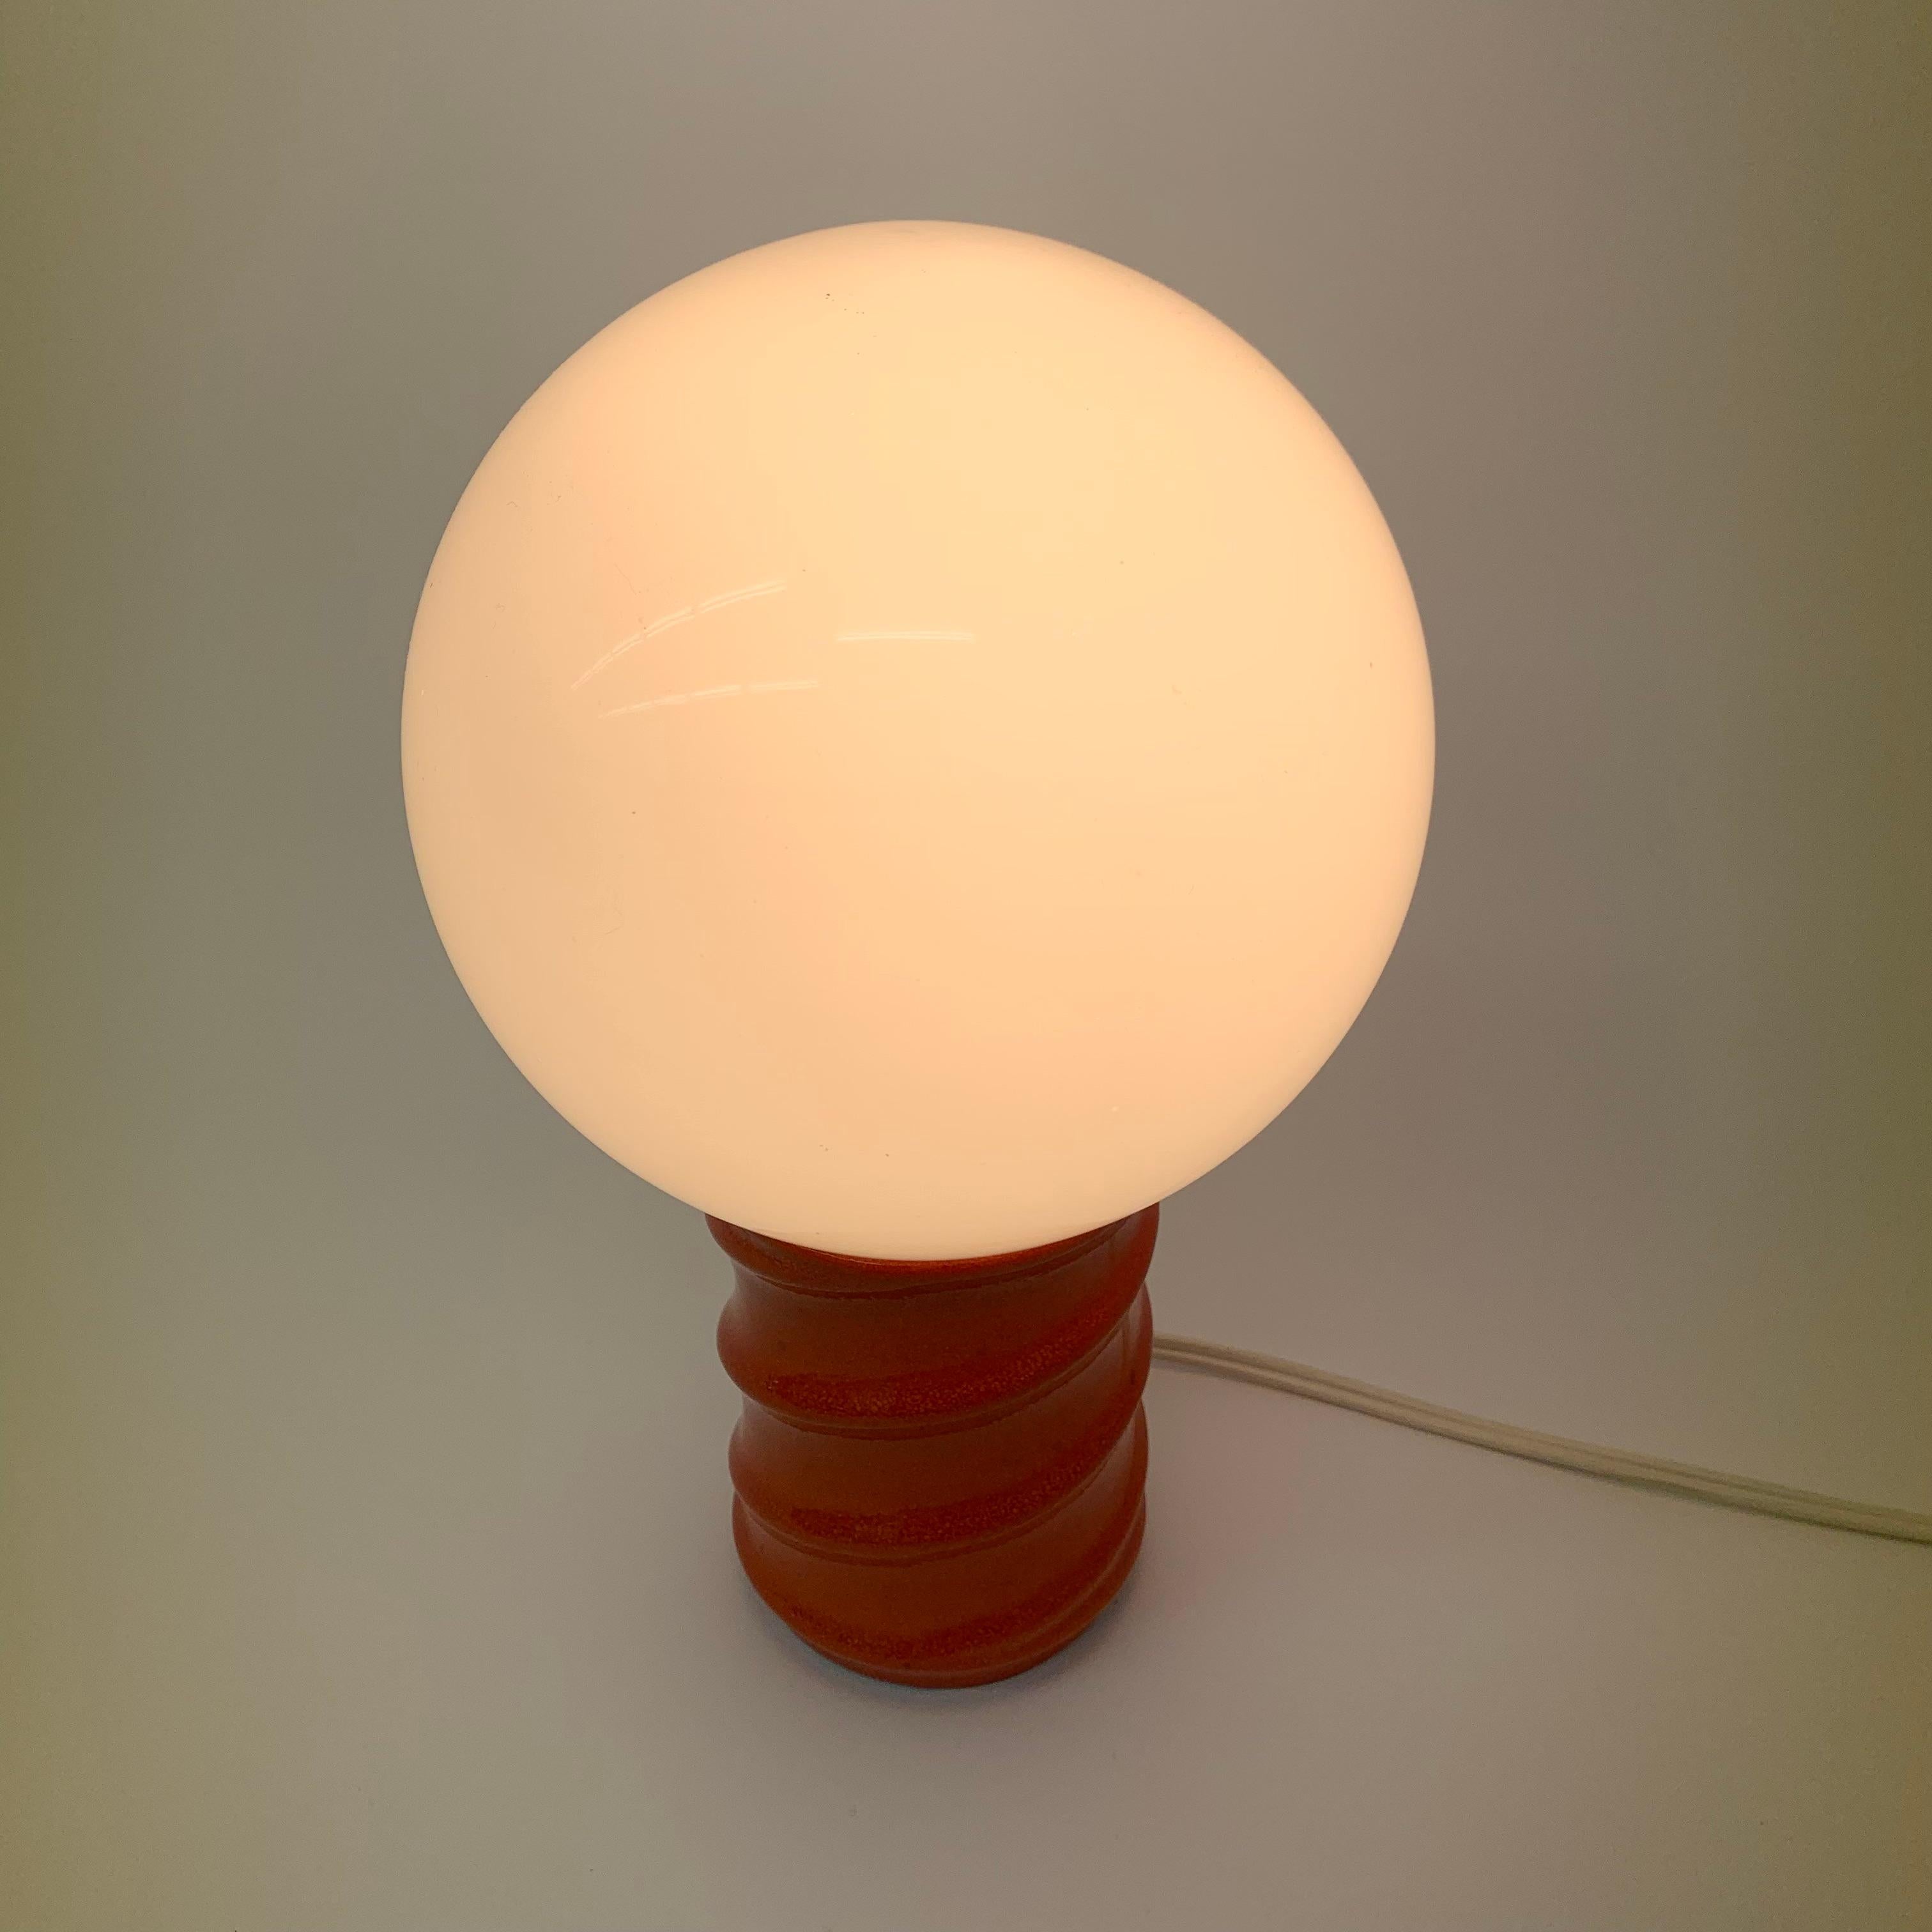 European Space Age Design Table Lamp, 1970’s For Sale